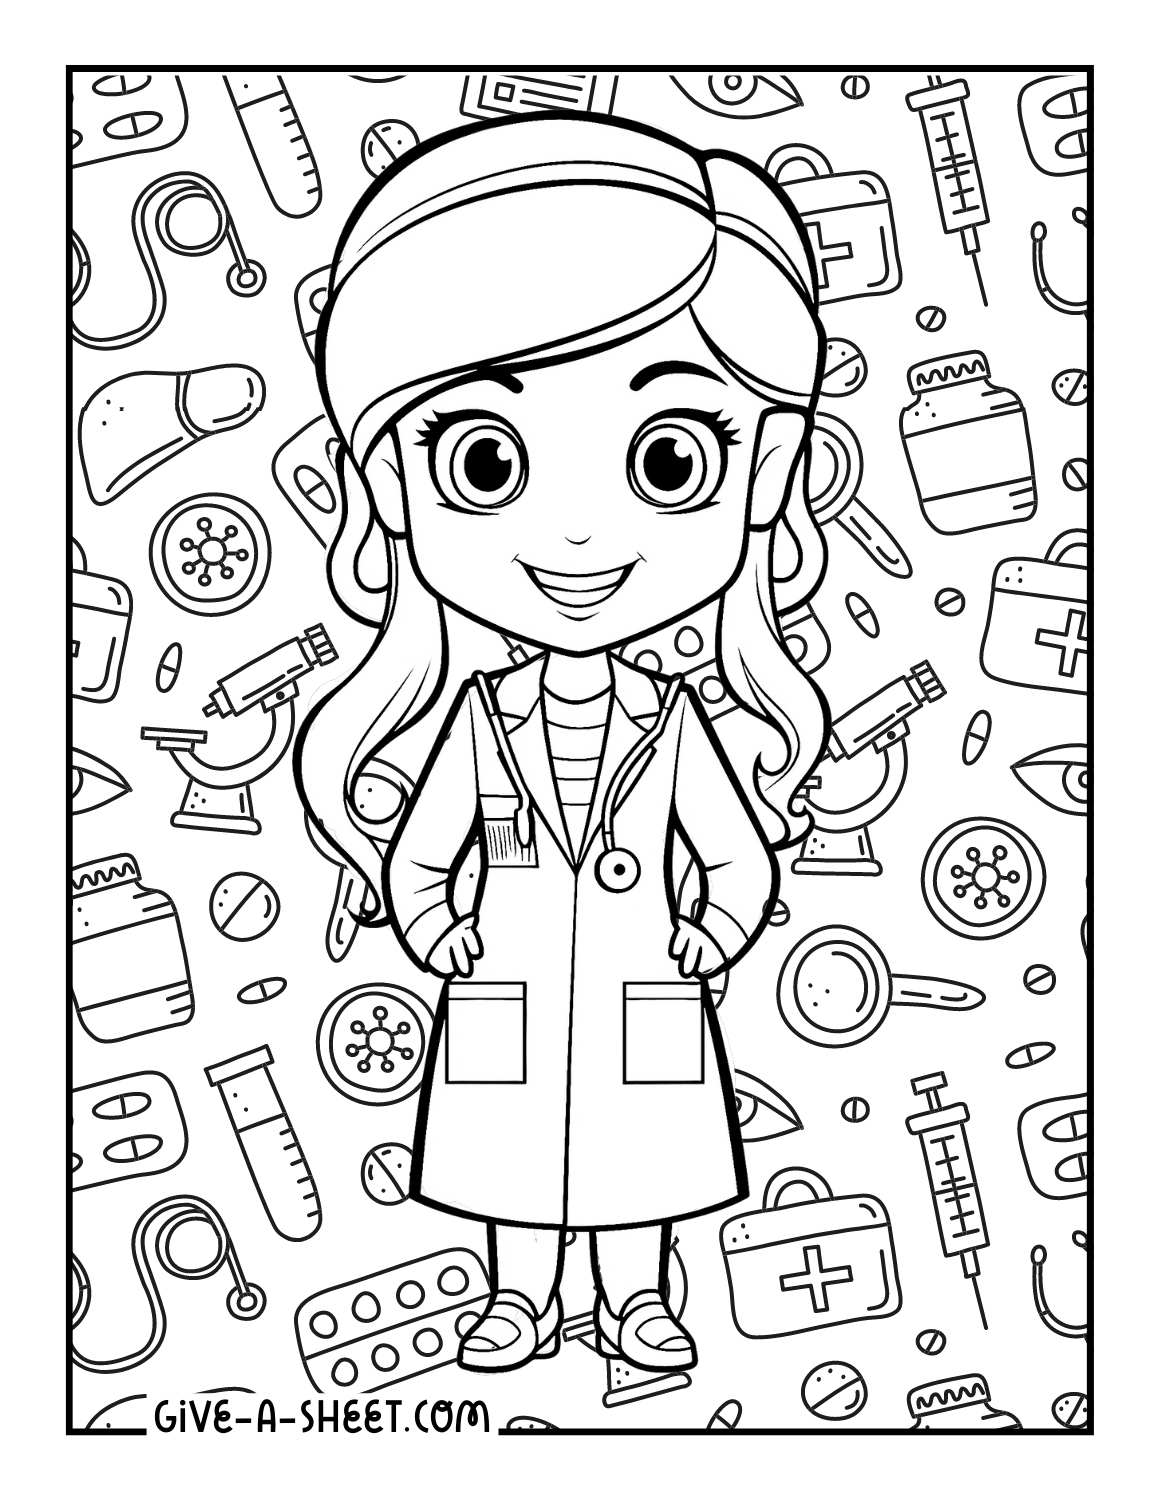 Friendly doctor doodle coloring page.